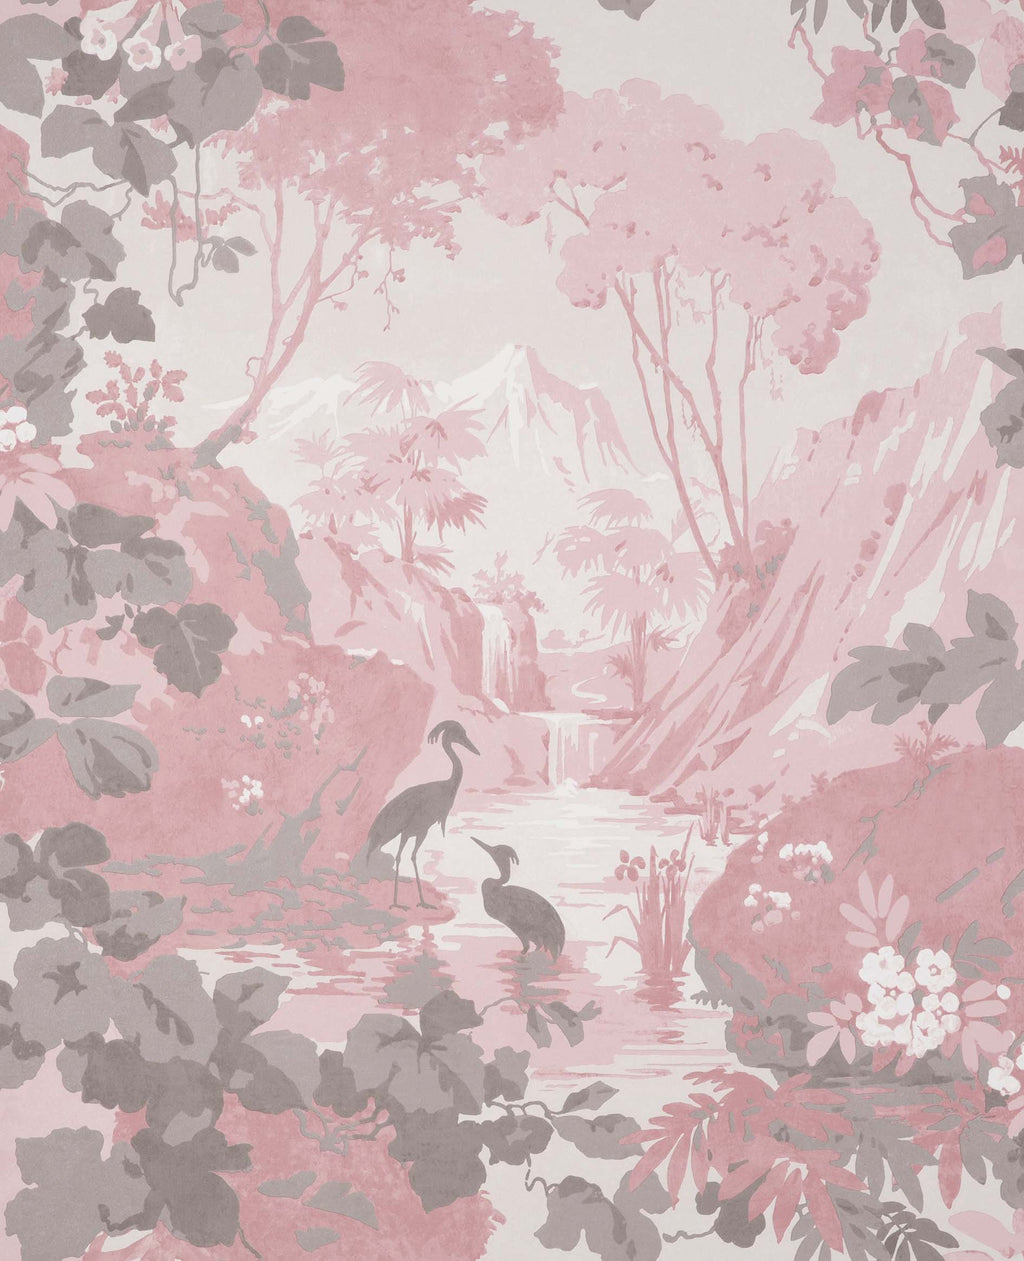 nm168876c Beautiful delicate landscape featuring gorgeous trees and birds. This fabulous design is taken from the archive collection, with designs dating from the past 100 years, reinvented to reflect contemporary tastes. Stunning paste the wall designer wallpaper.